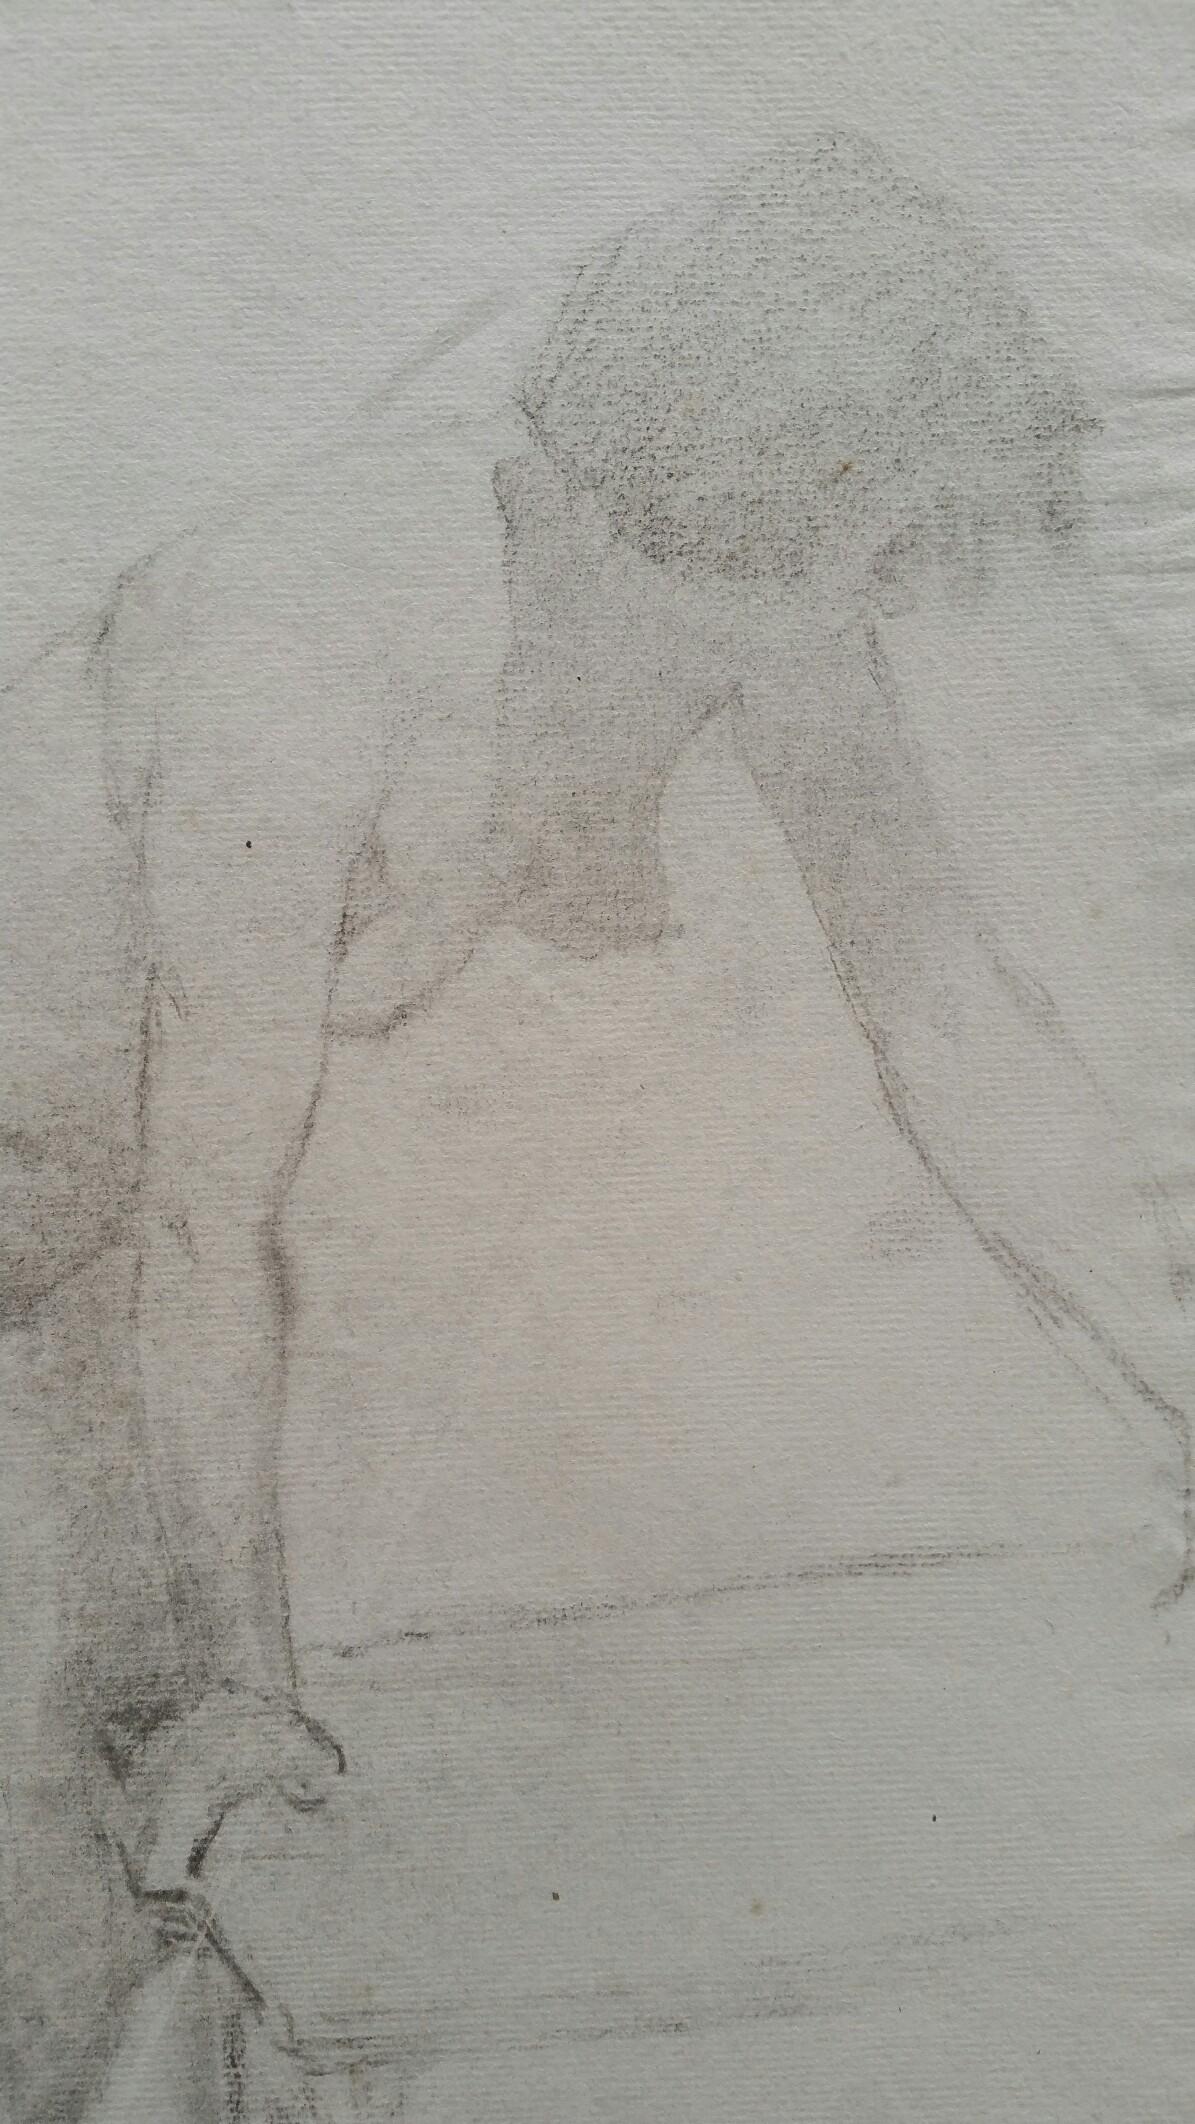 English Graphite Sketch of a Female Nude, Leaning
by Henry George Moon (British 1857-1905)
on off white artists paper, unframed
measurements: sheet 18.25 x 11.5 inches 

provenance: from the artists estate

Condition report: pin holes to corners